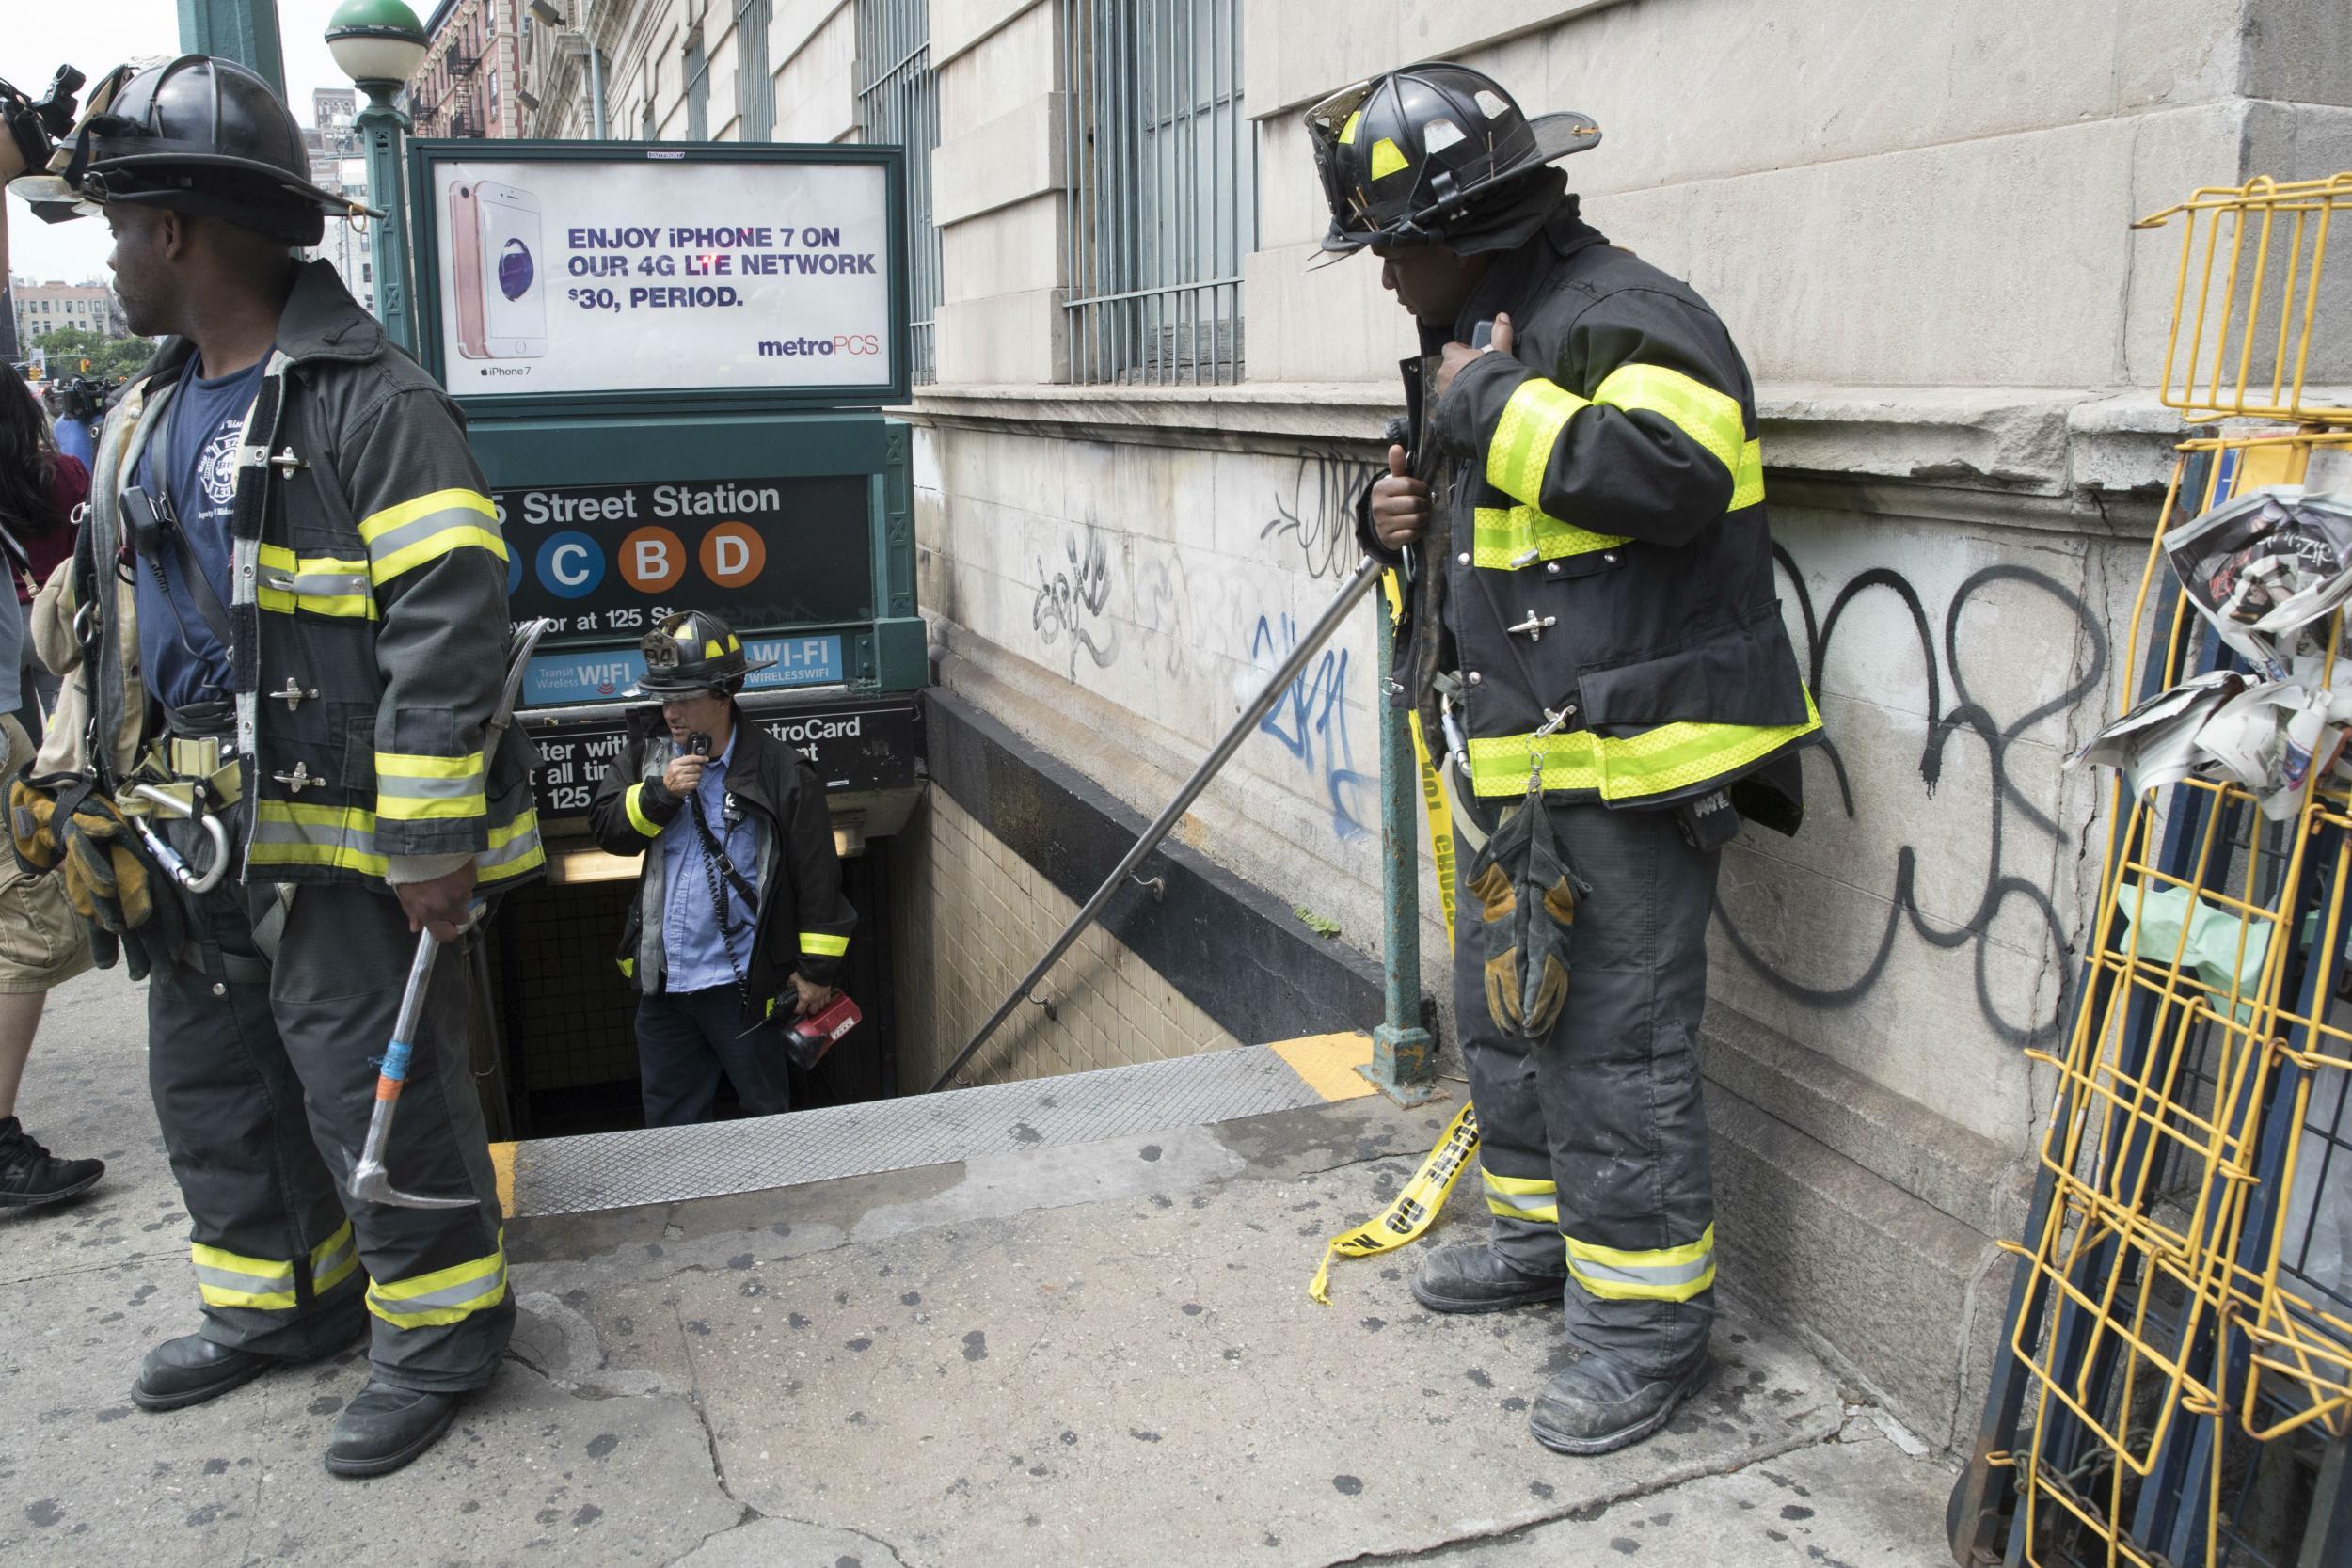 More than 30 people were injured this week after a derailment in Harlem